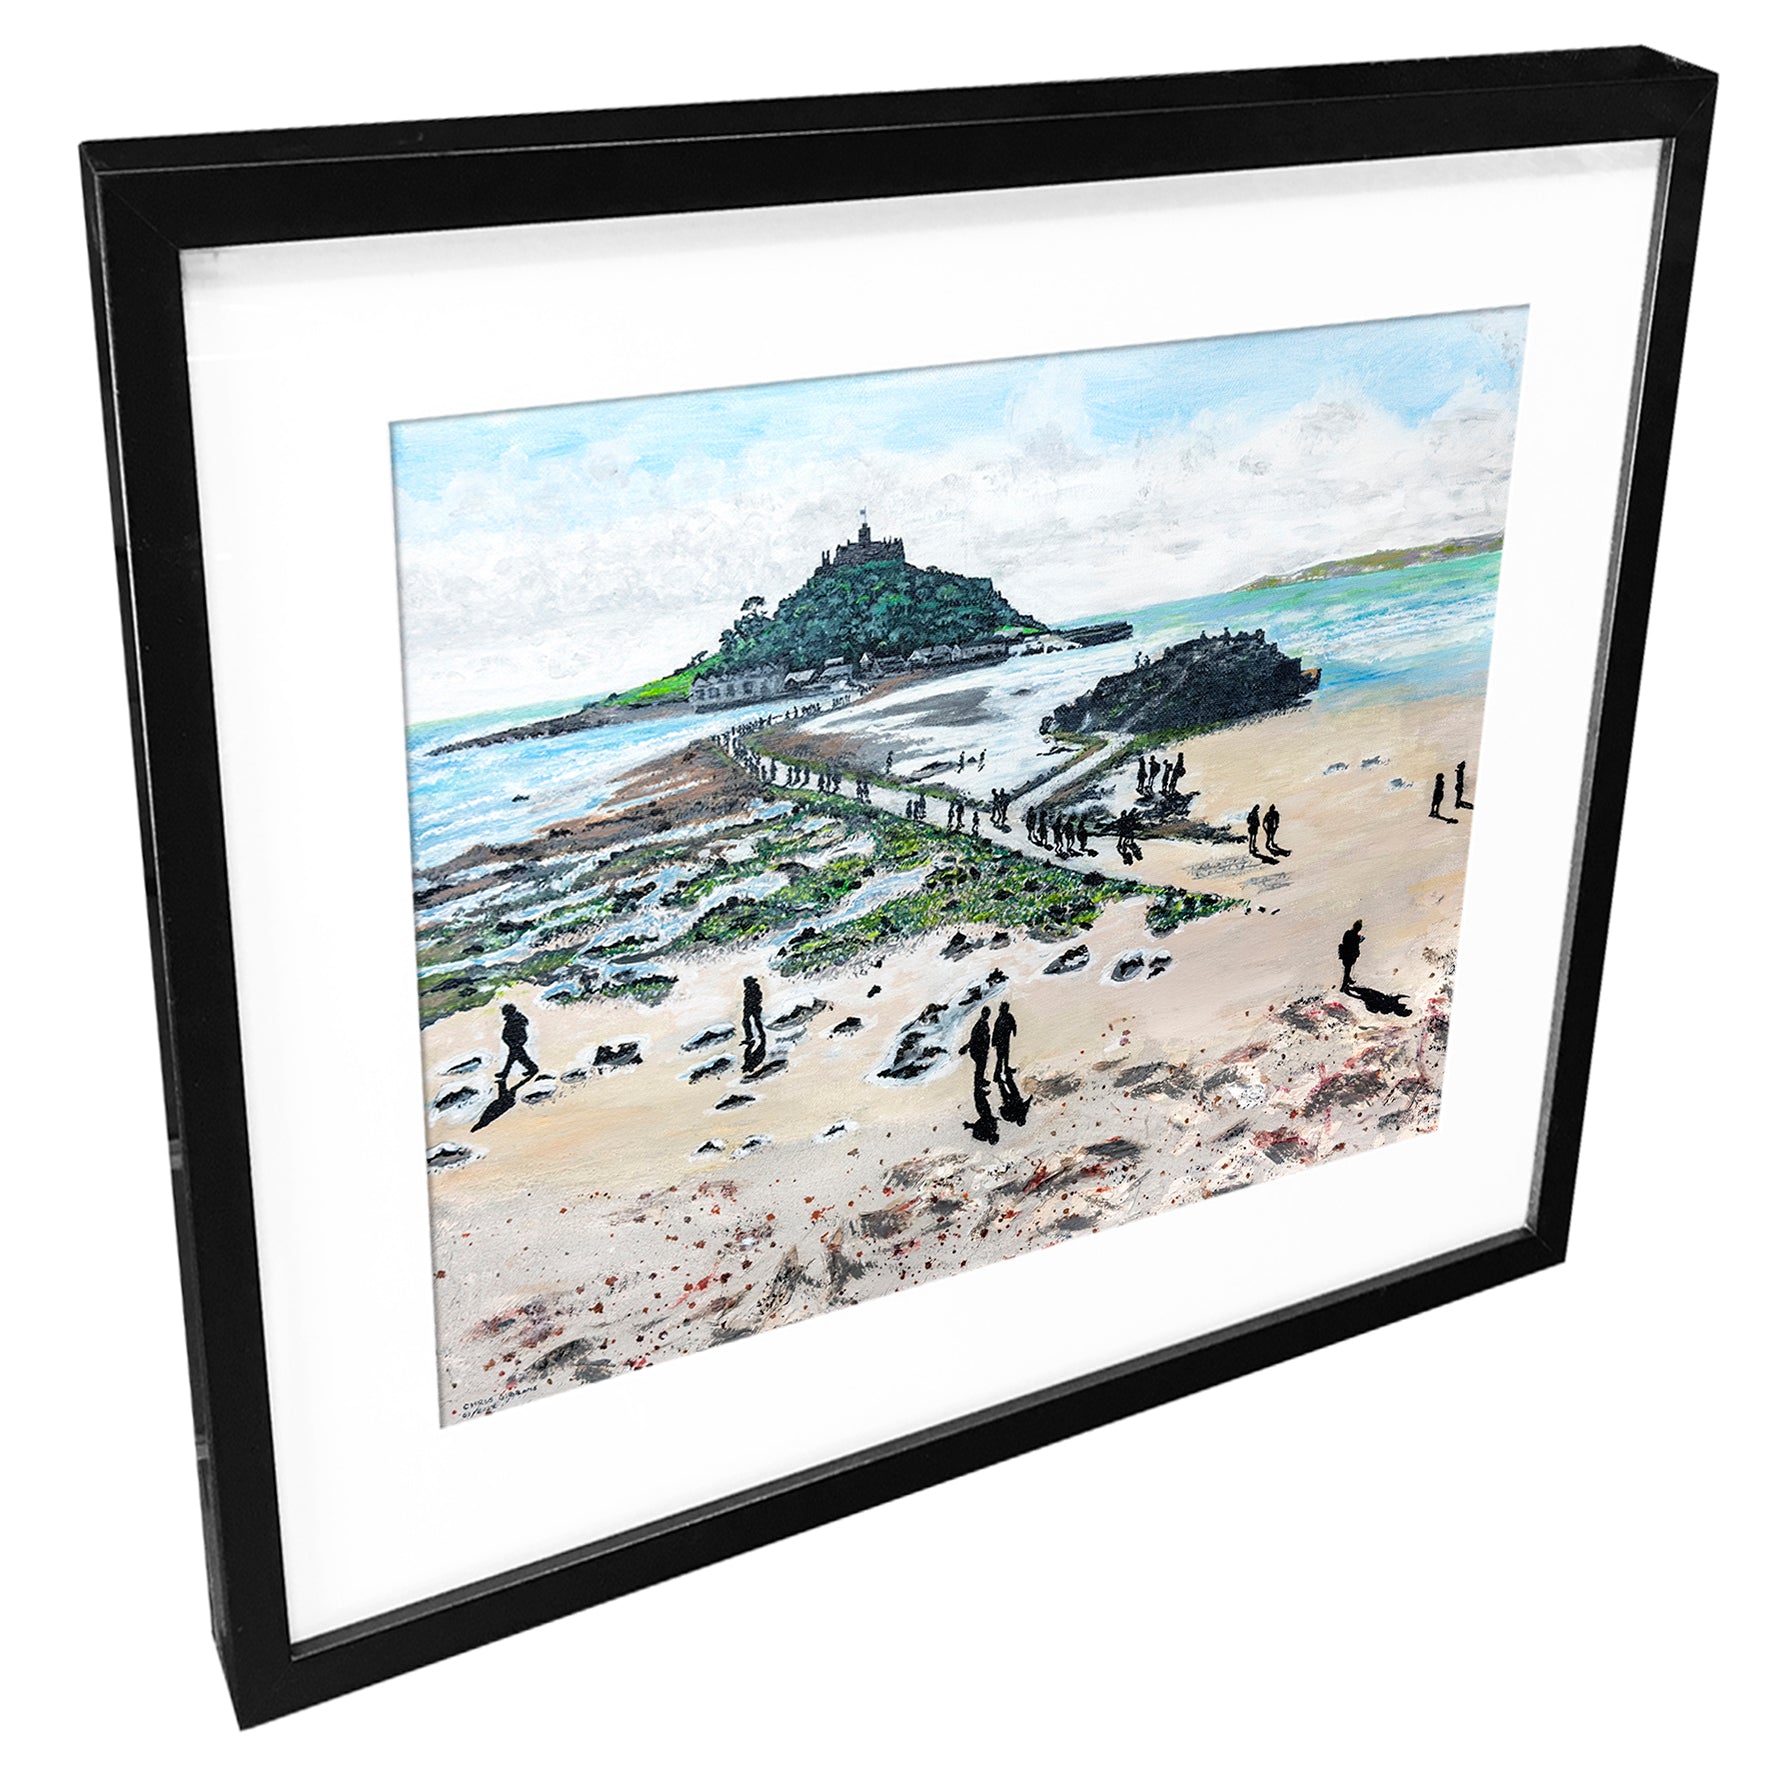 St Michael's Mount, Cornwall by Chris Gibbons - signed limited edition Giclée print on Hahnhemühle Fine Art Pearl